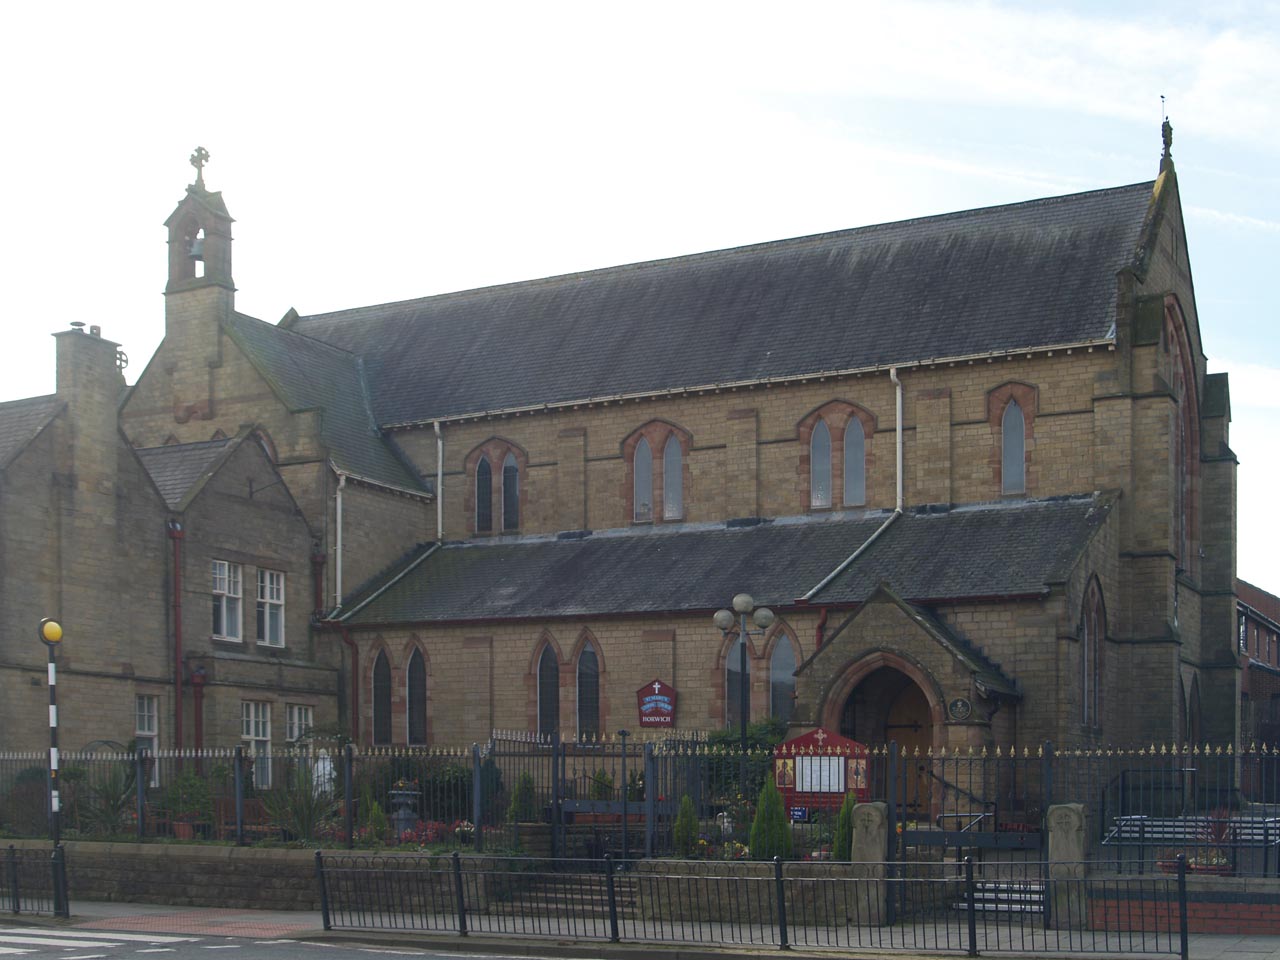 The Church of St Mary, Horwich